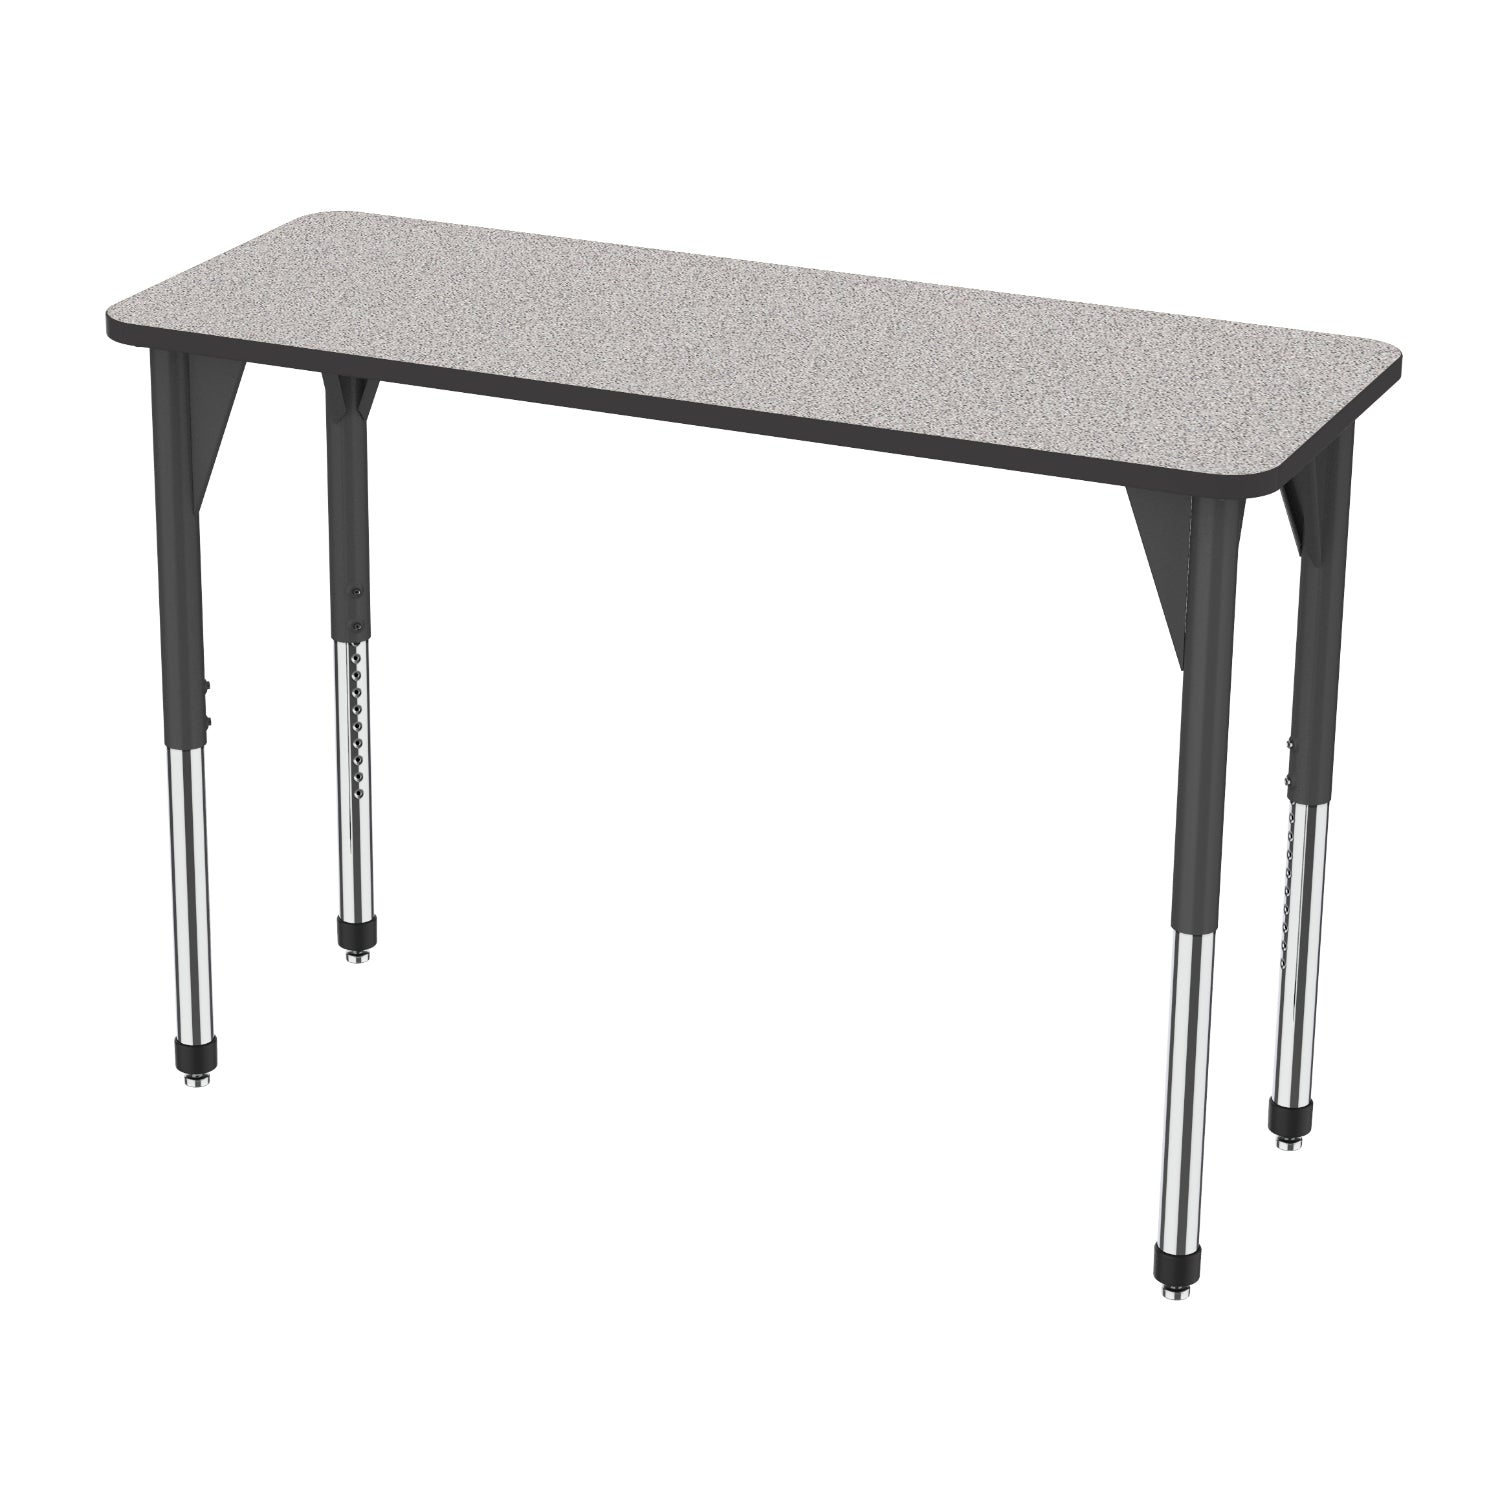 Premier Standing Height Collaborative Classroom Table, 24" x 60" Rectangle